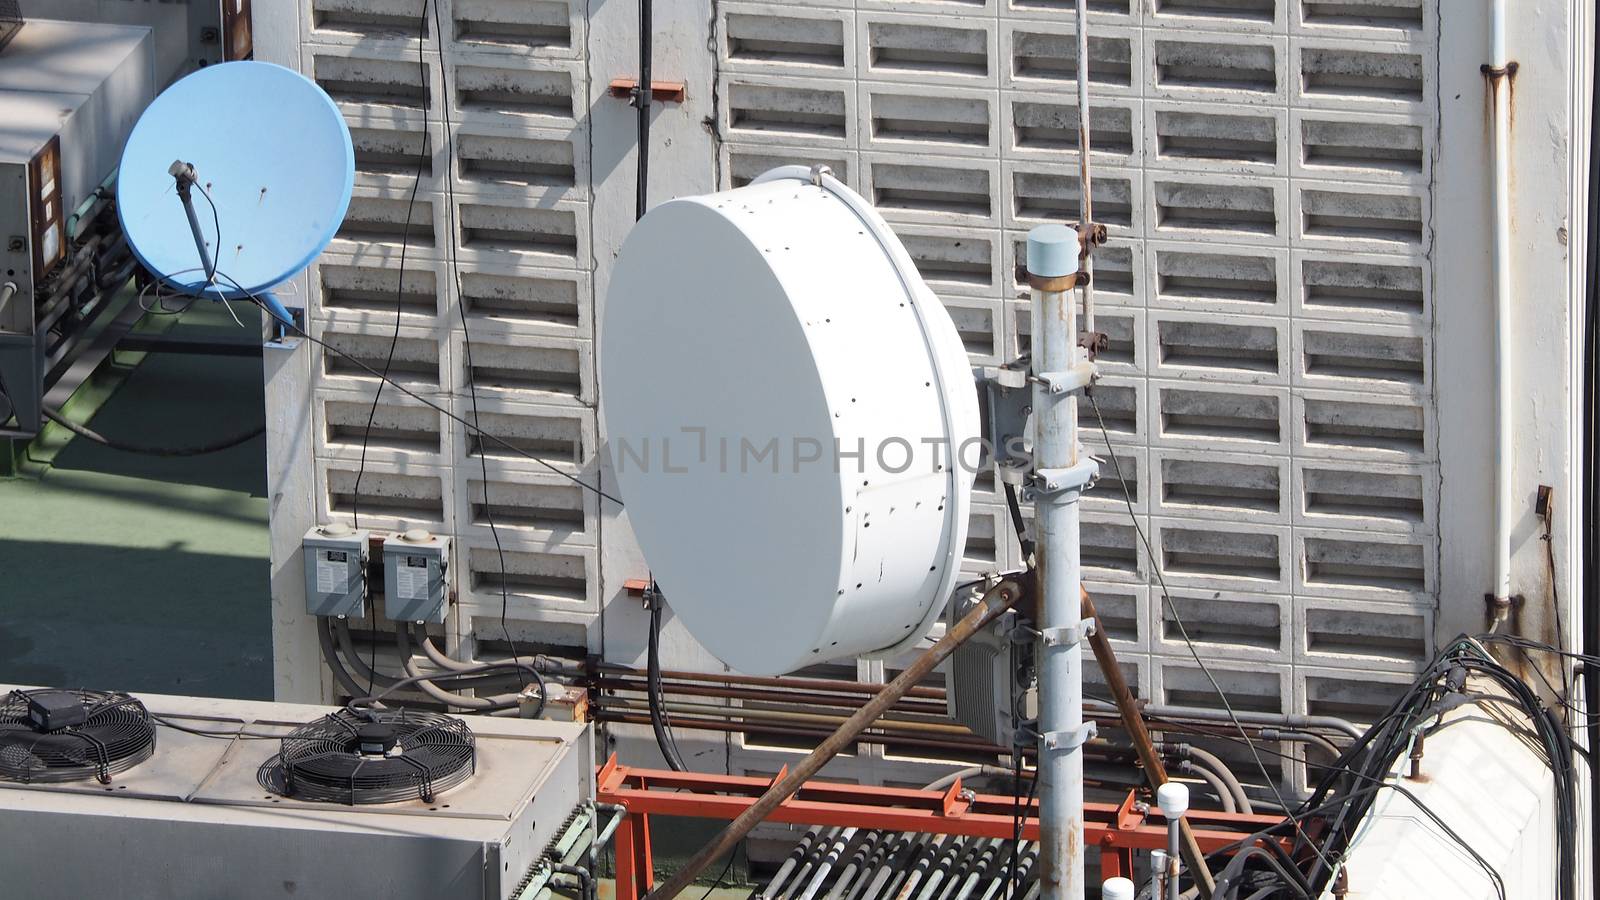 Old big telecommunication satellite dish on roof top of building.